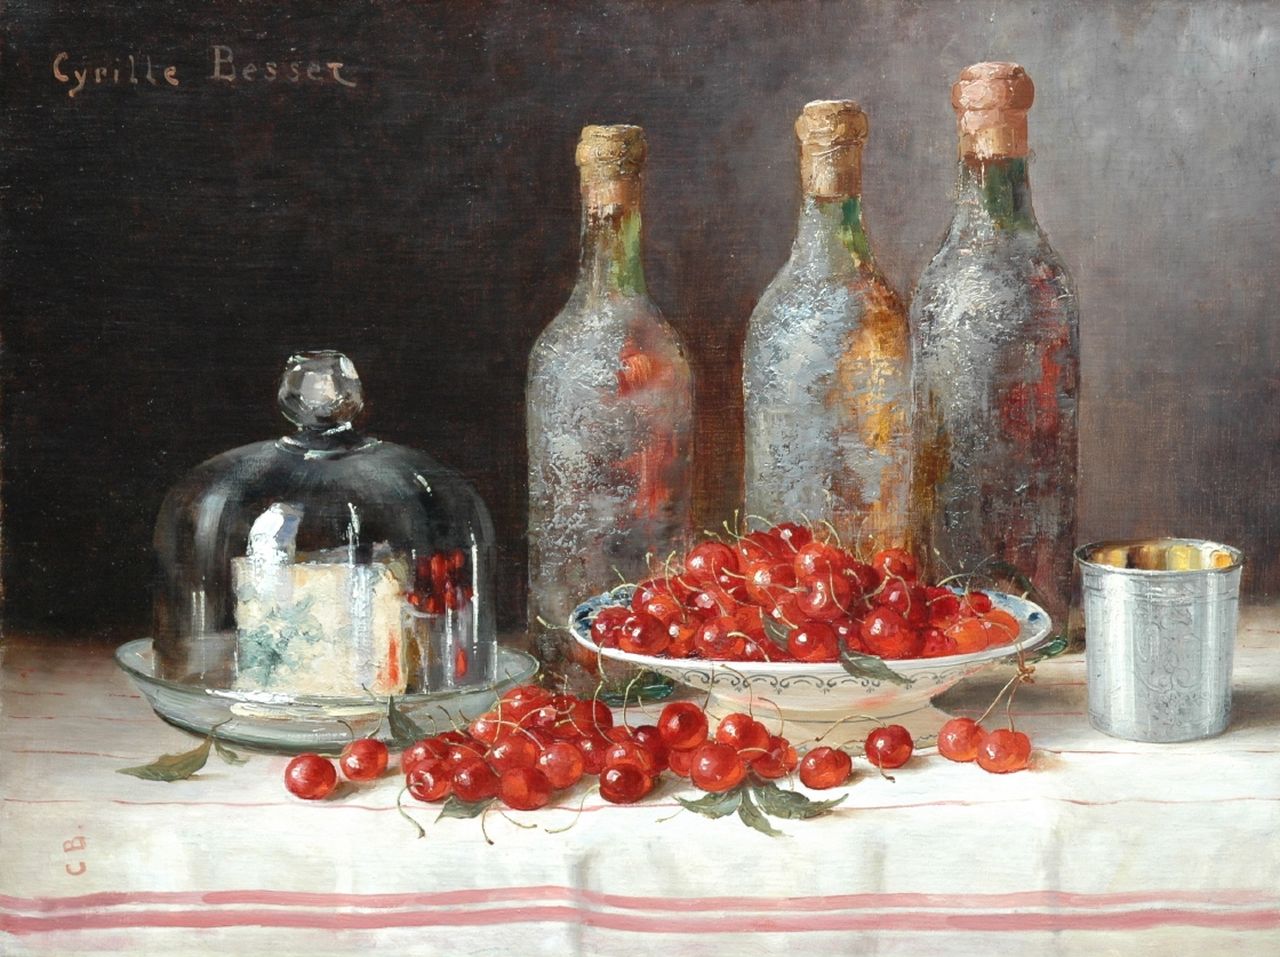 Besset C.  | Cyrille Besset, A still life with bottles, cheese and cherries, Öl auf Leinwand 49,4 x 65,0 cm, signed u.l. and l.l. with initials